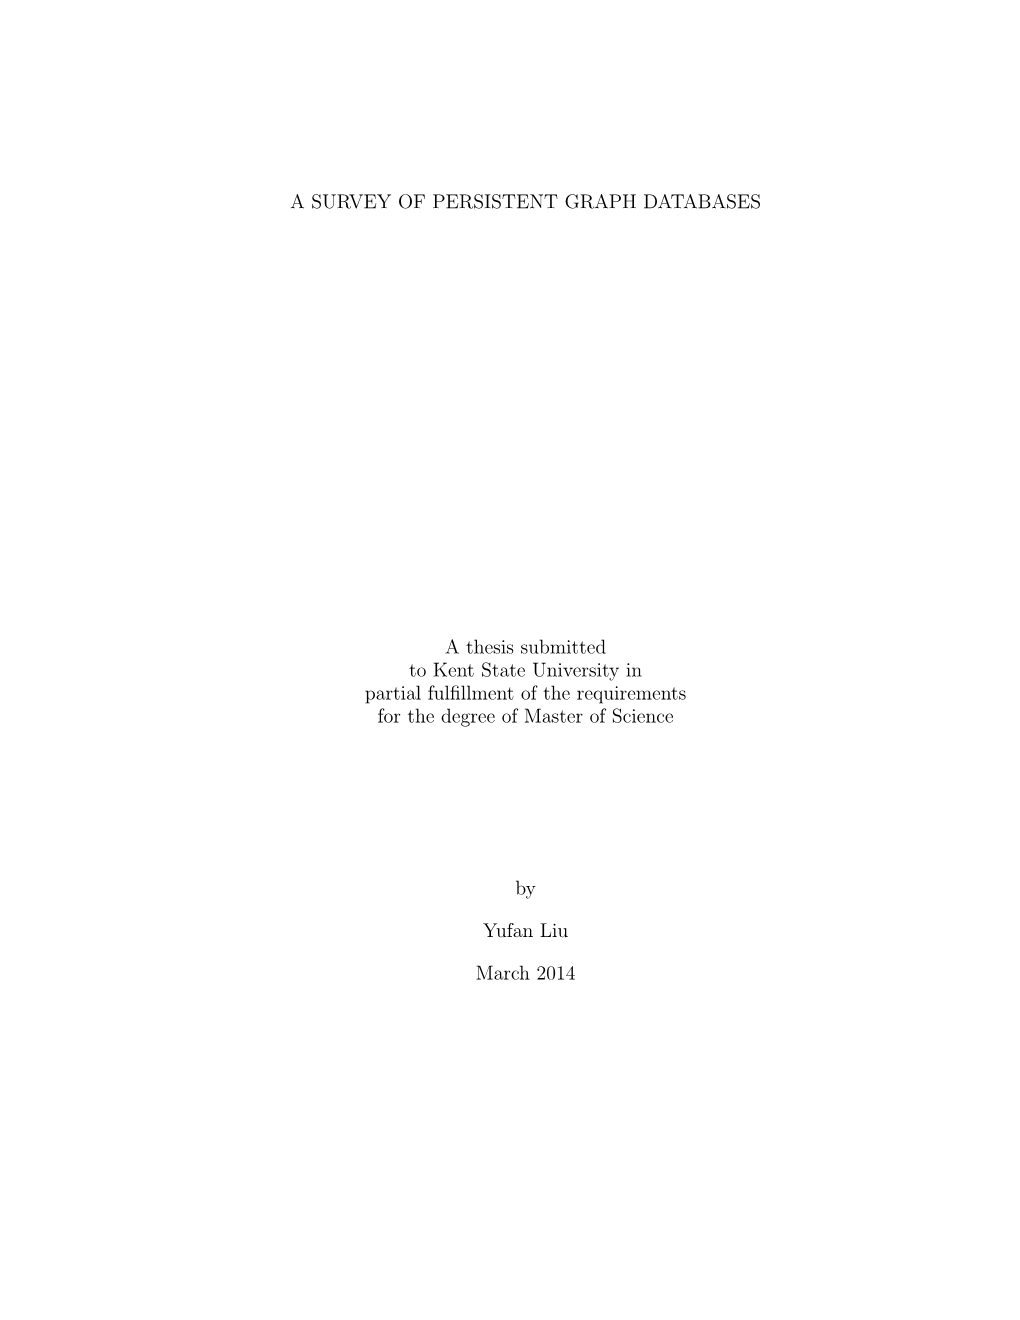 A SURVEY of PERSISTENT GRAPH DATABASES a Thesis Submitted To